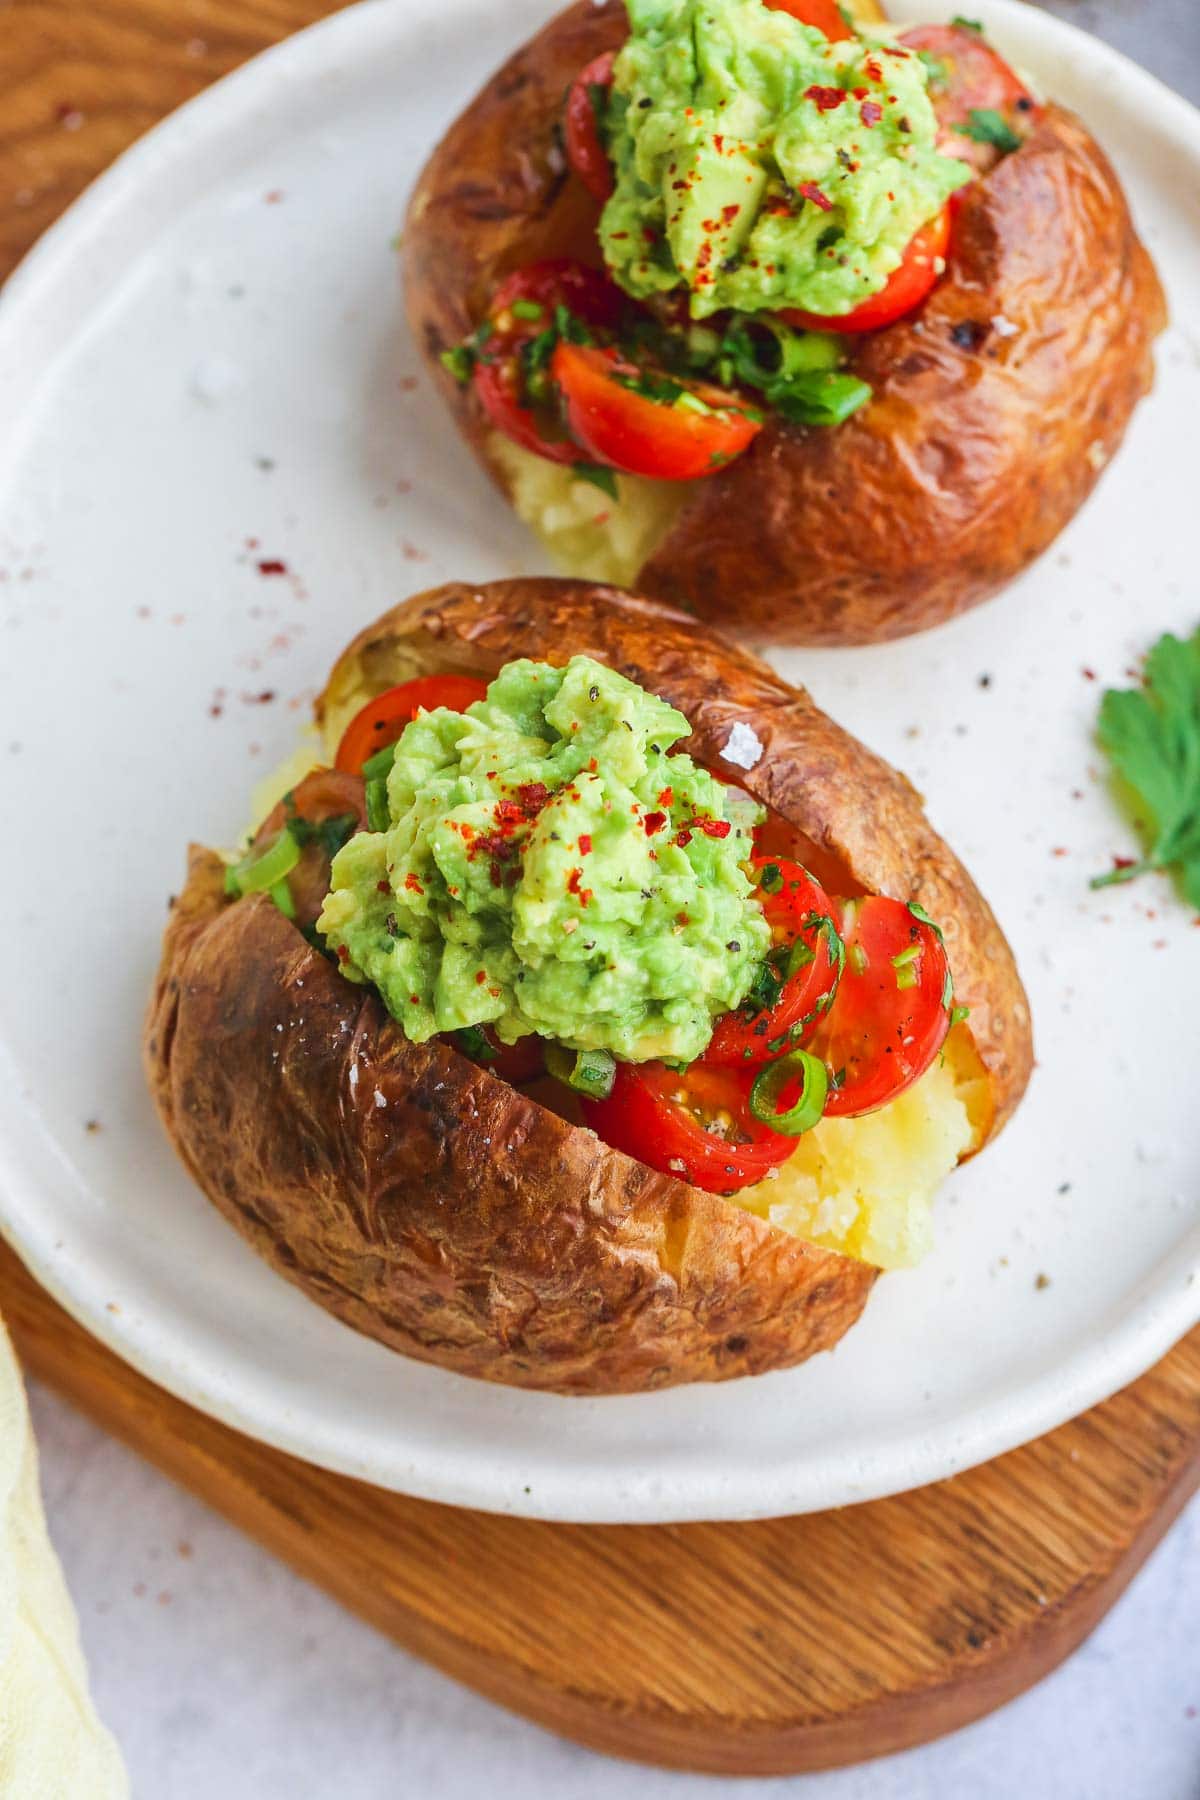 Air Fryer baked potato topped with tomato salad and smashed avocado on a white plate and a wooden cutting board.